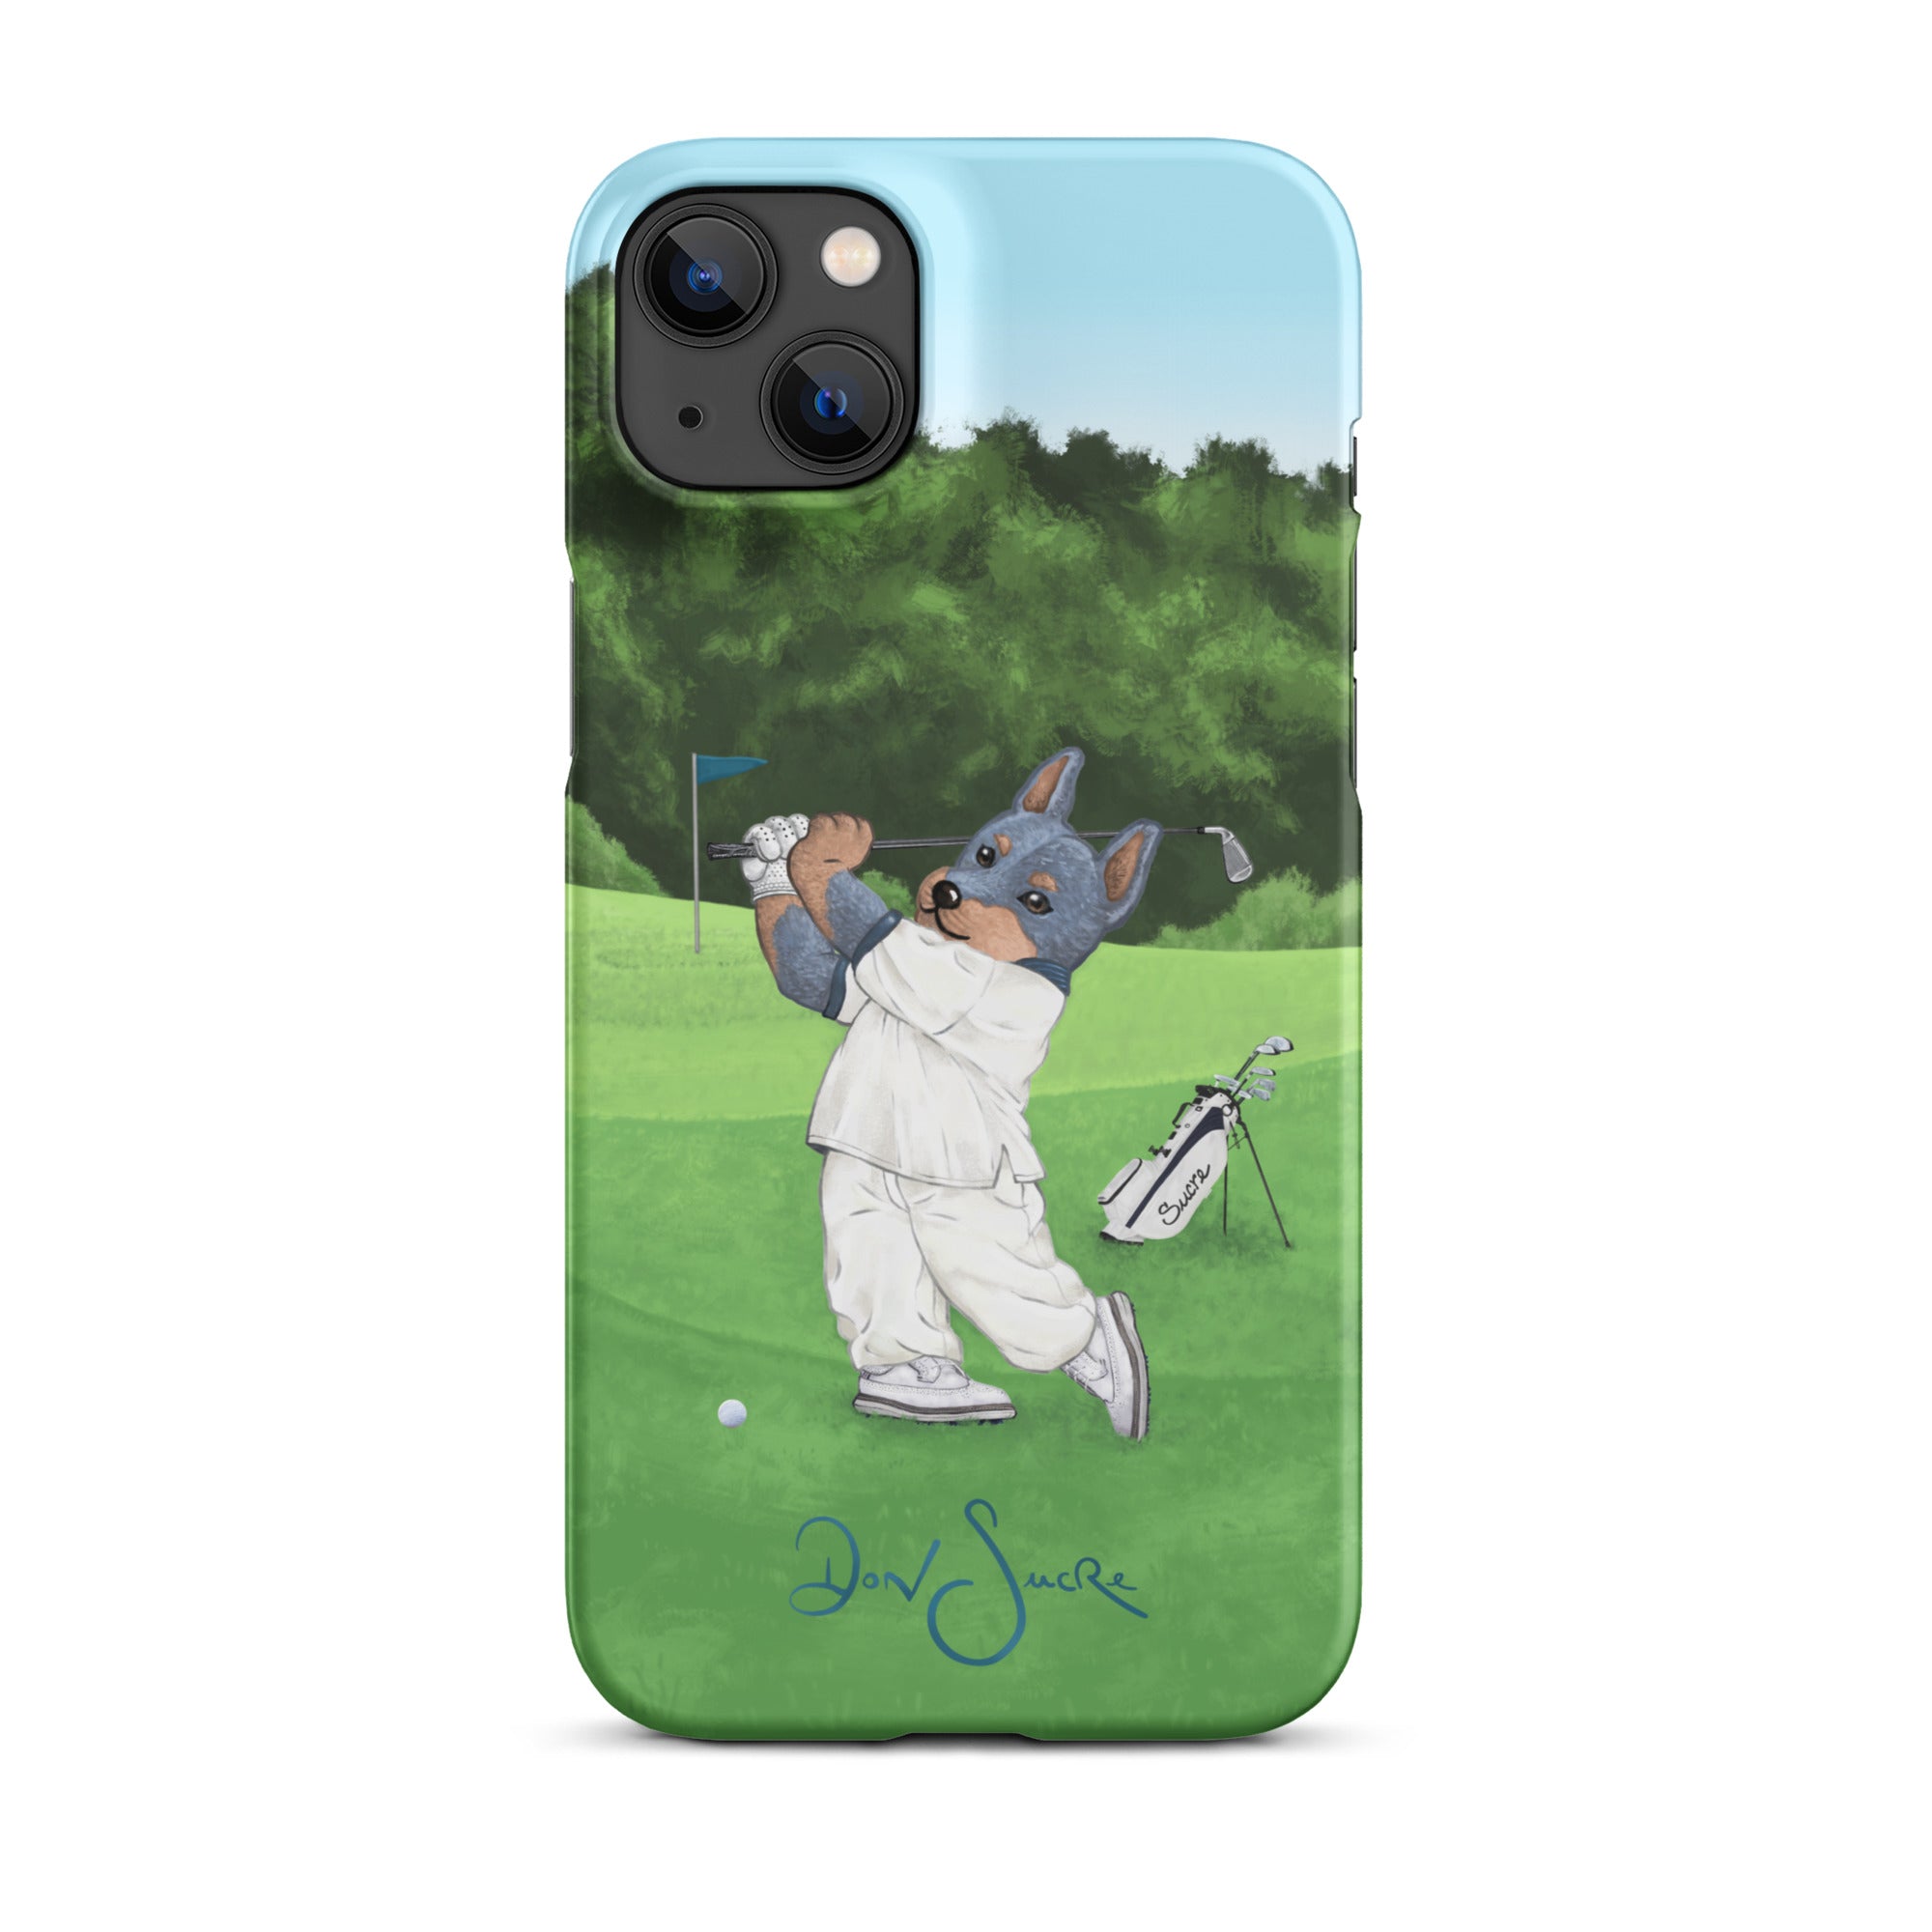 "The Ace" iPhone case